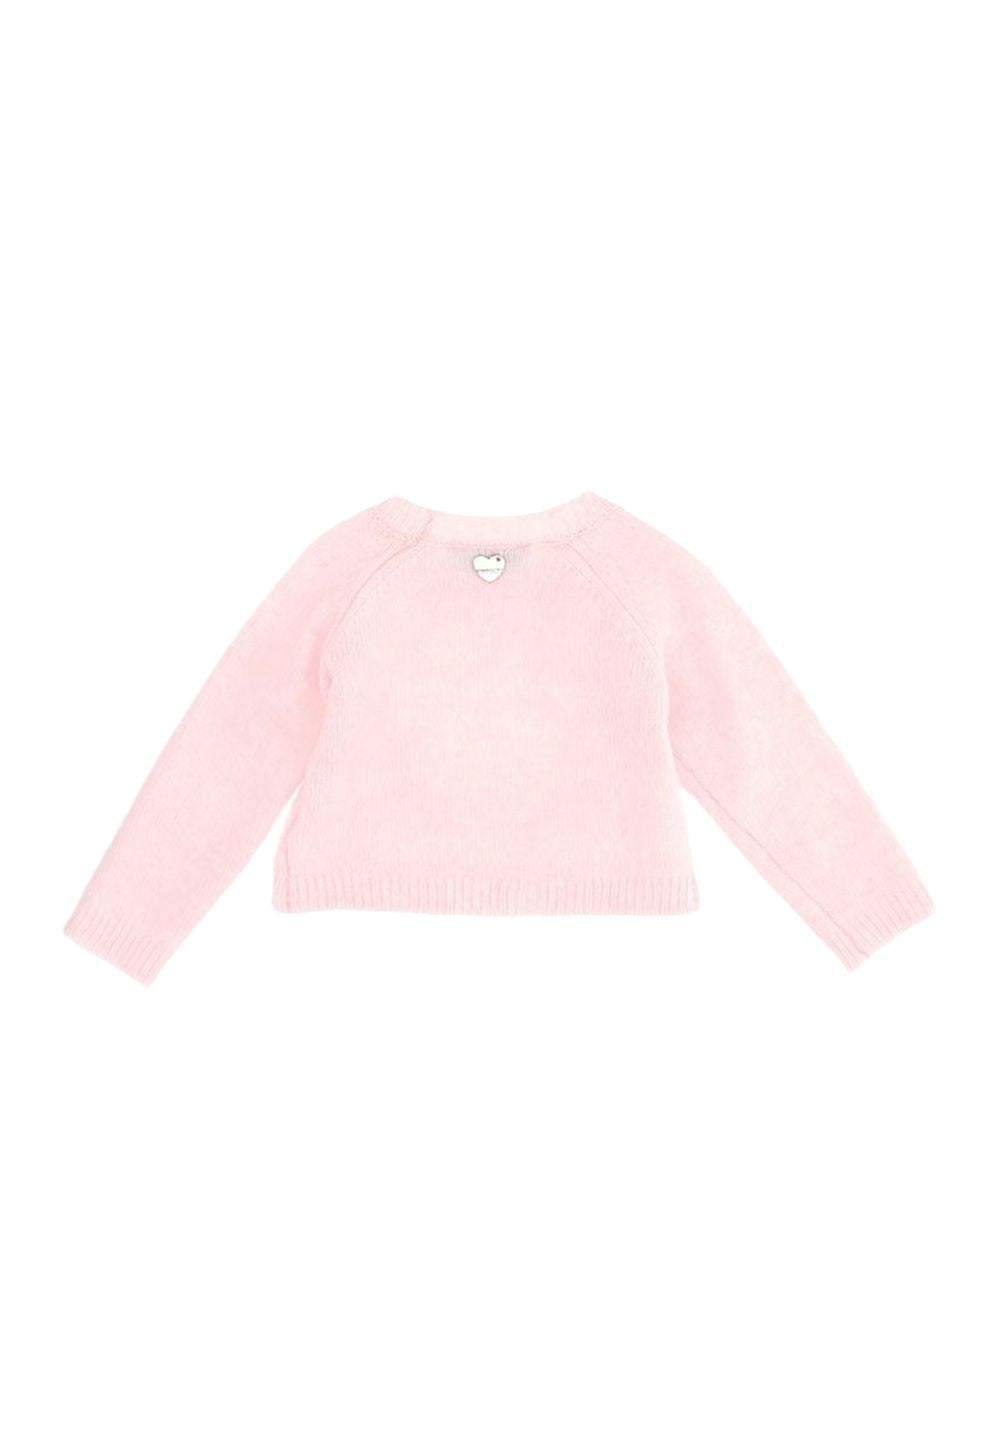 Pink sweater for baby girls